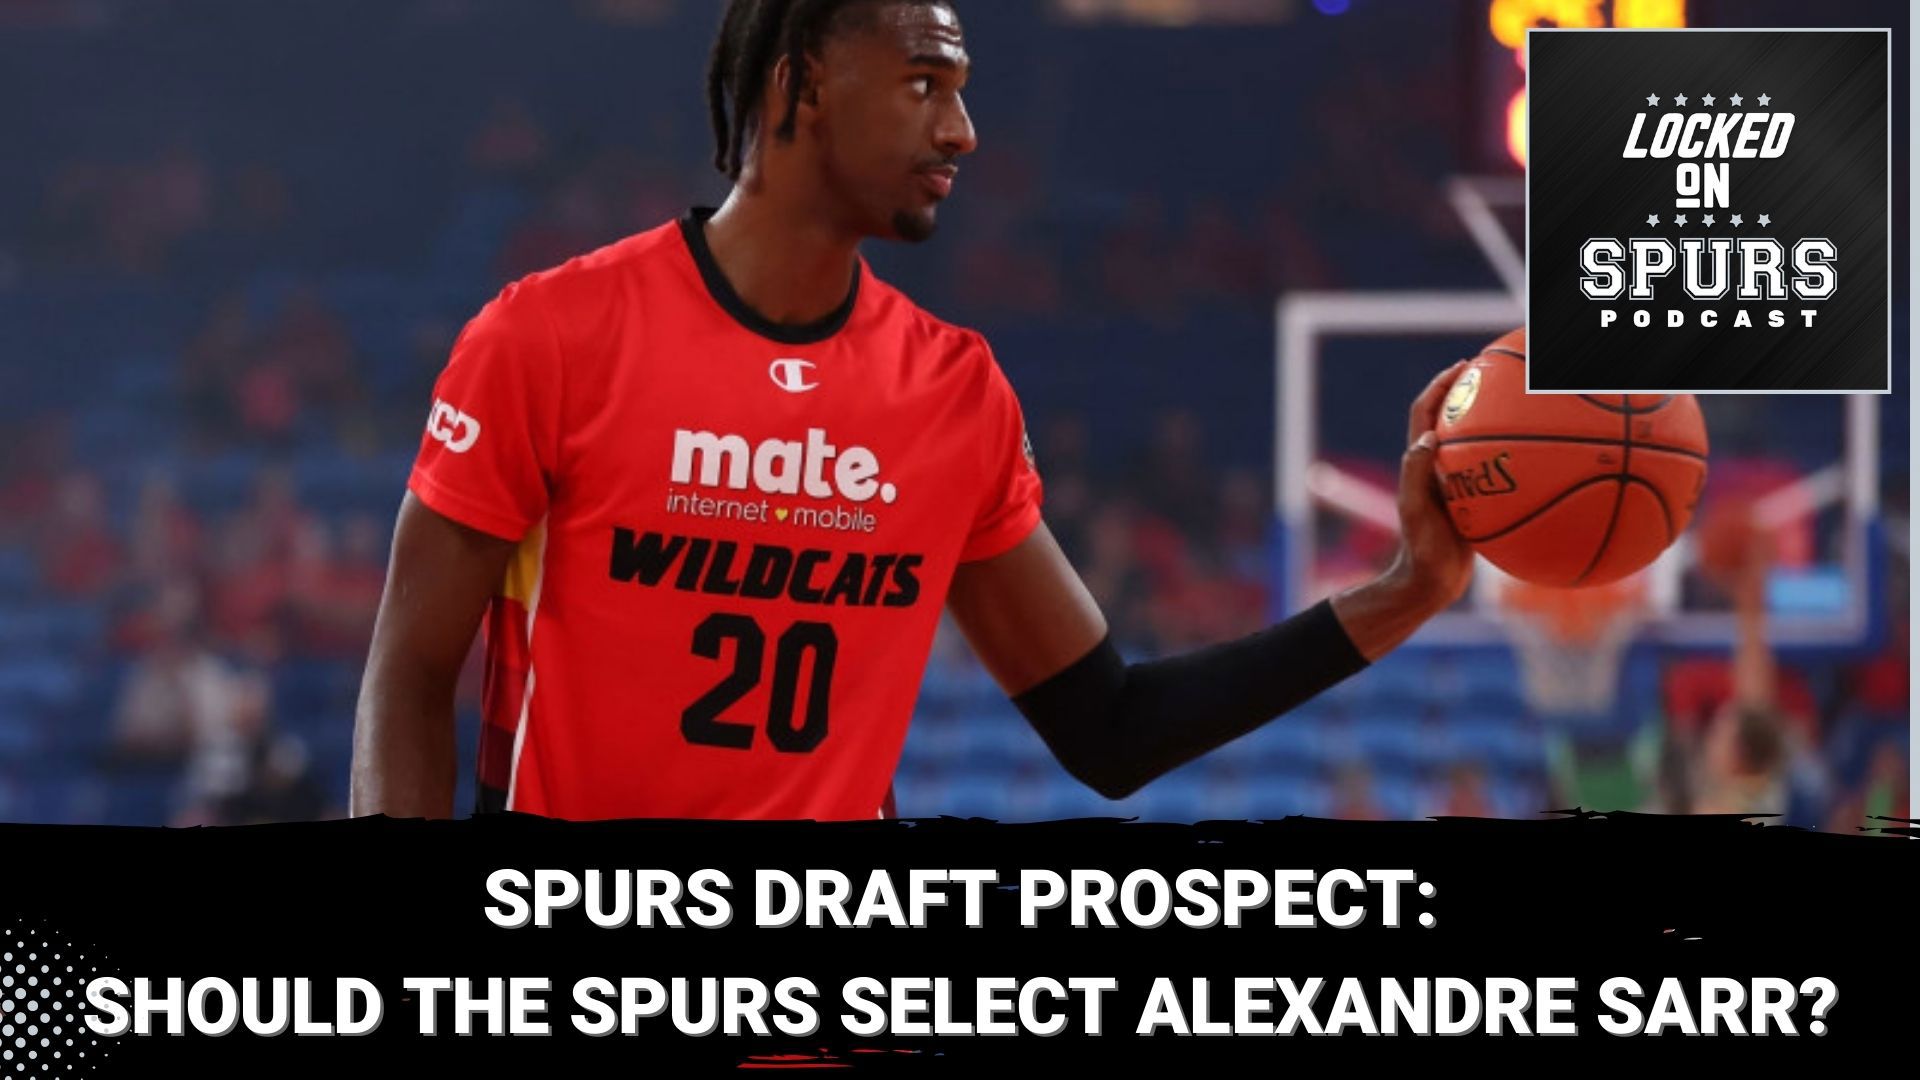 Should the Spurs select the French big man at the NBA Draft?